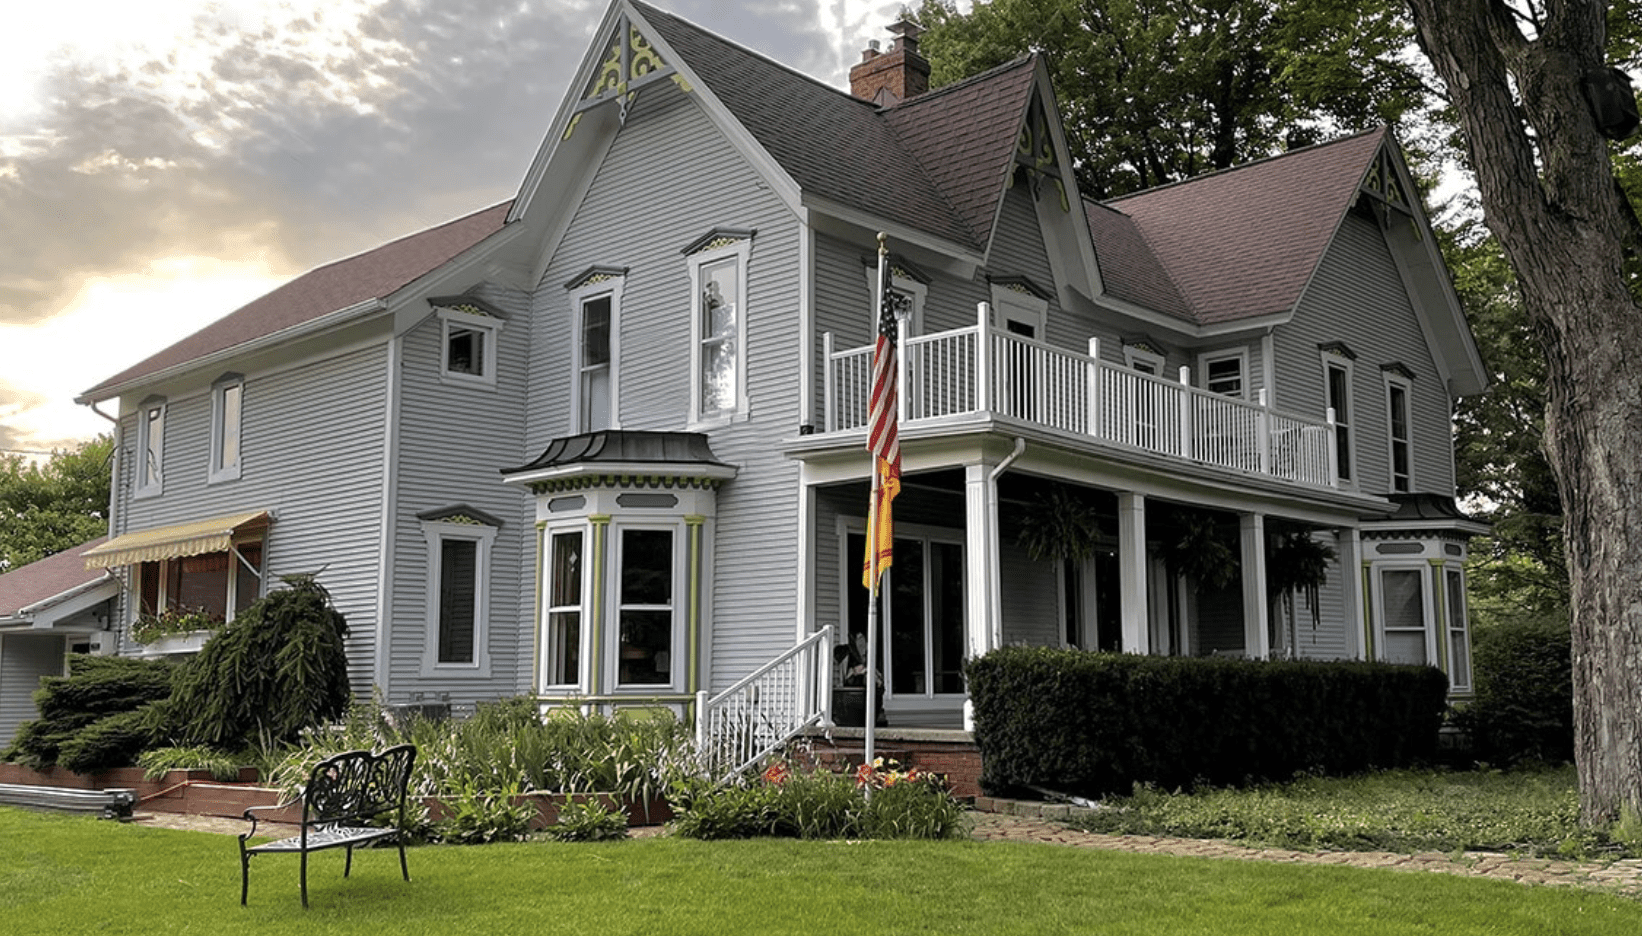 Grey Farmhouse with a porch and flag